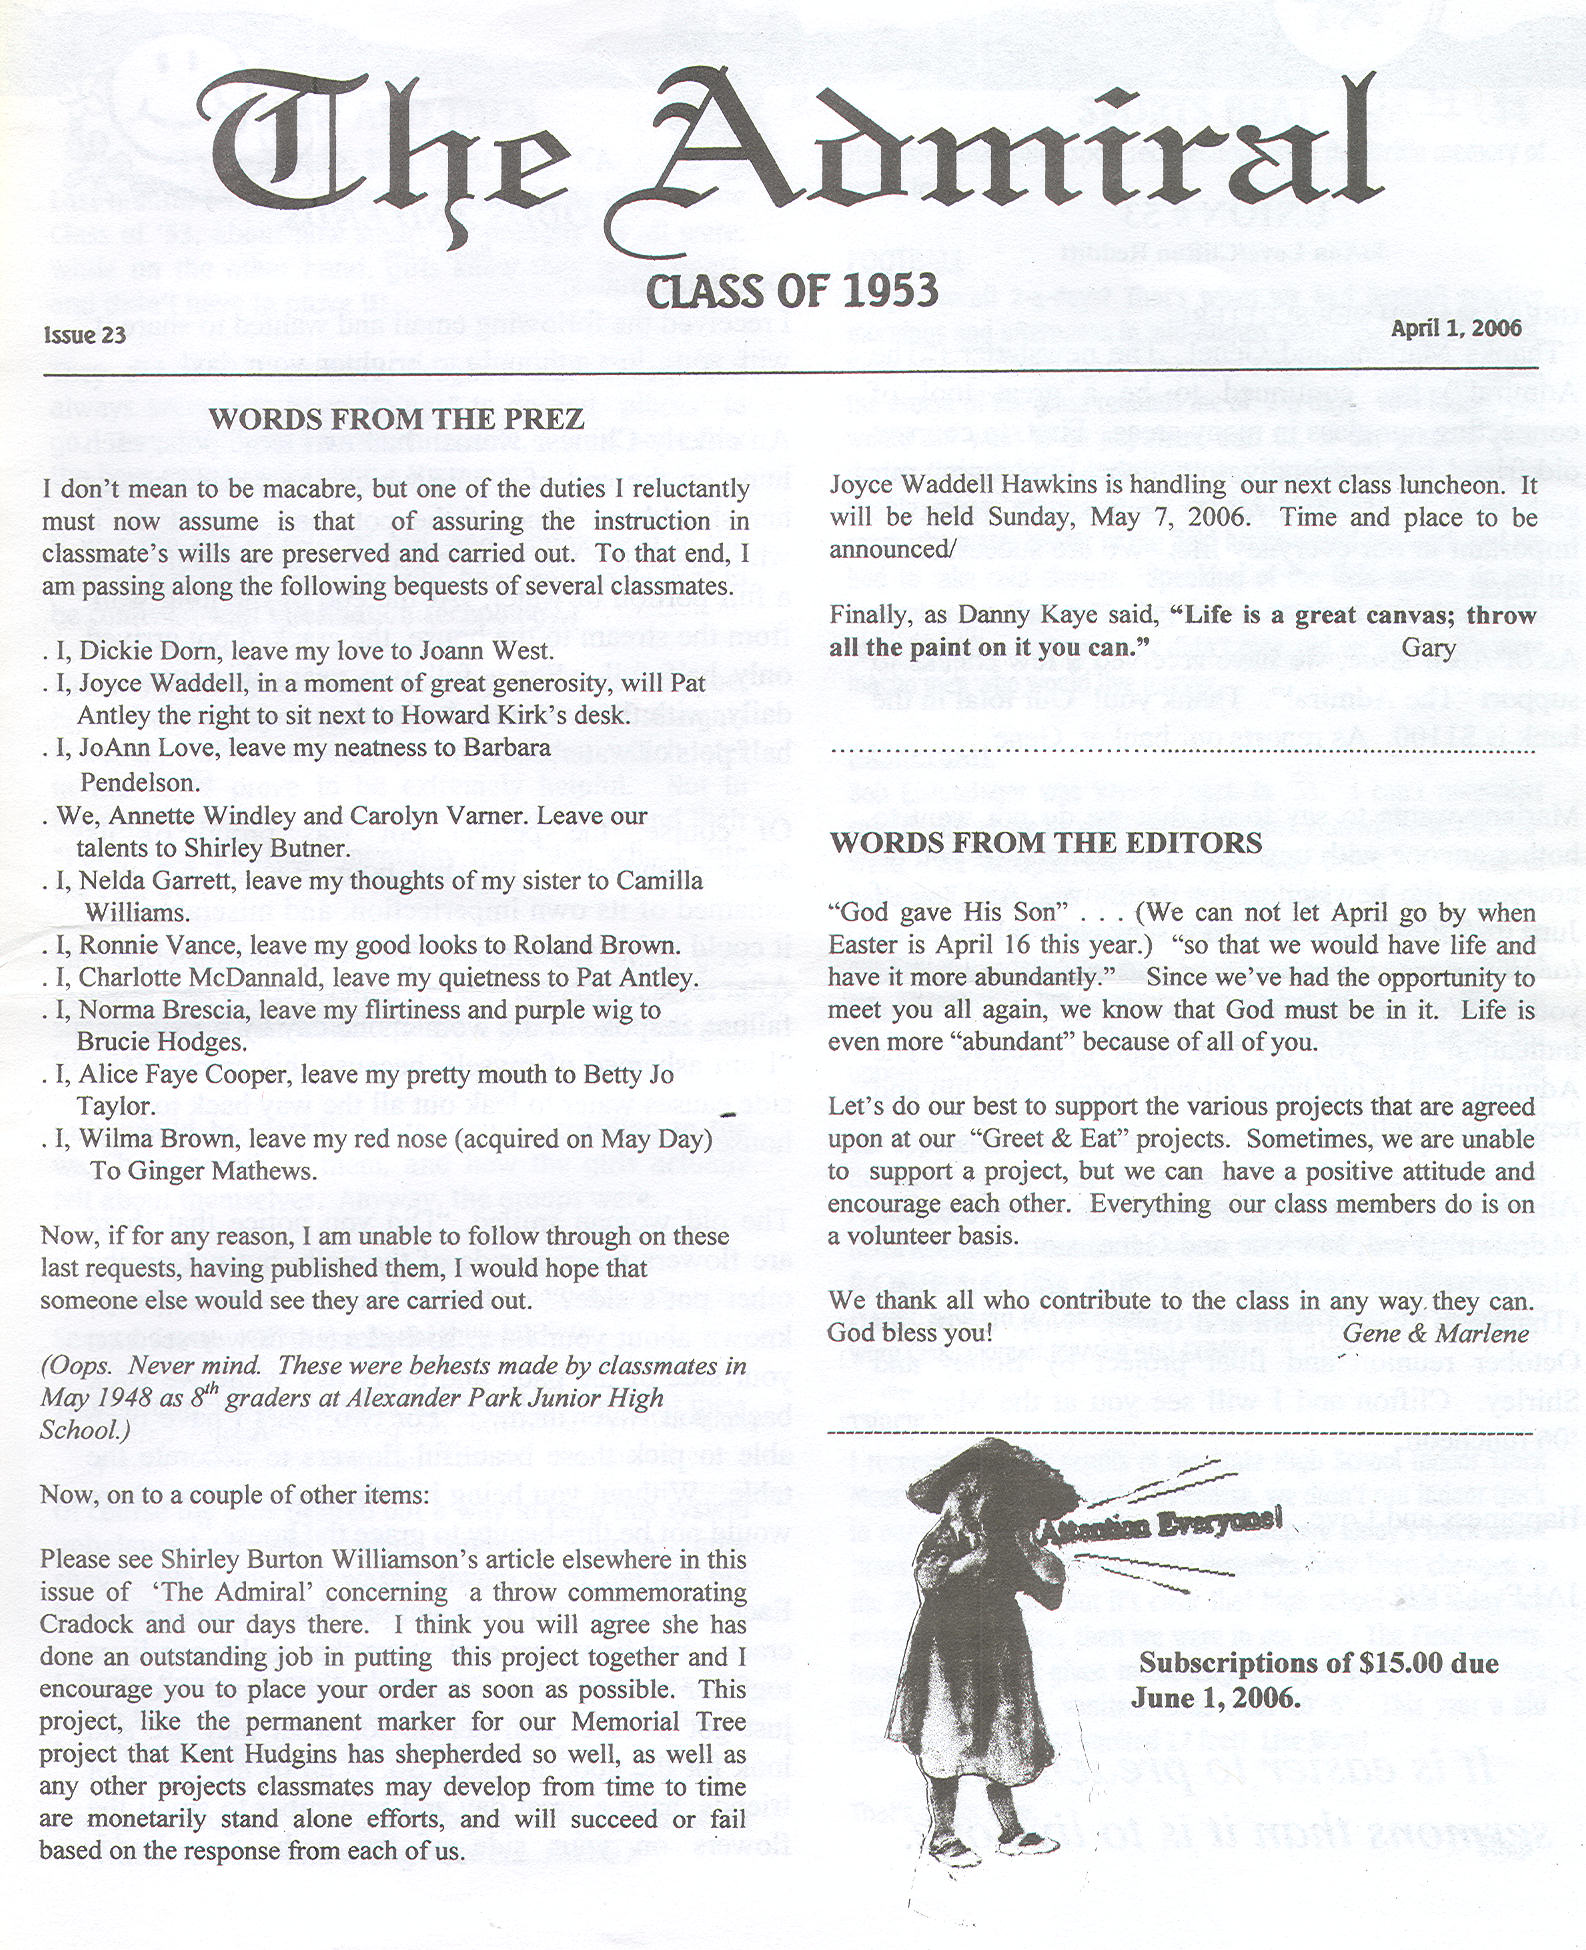 The Admiral - April 2006 - pg. 1